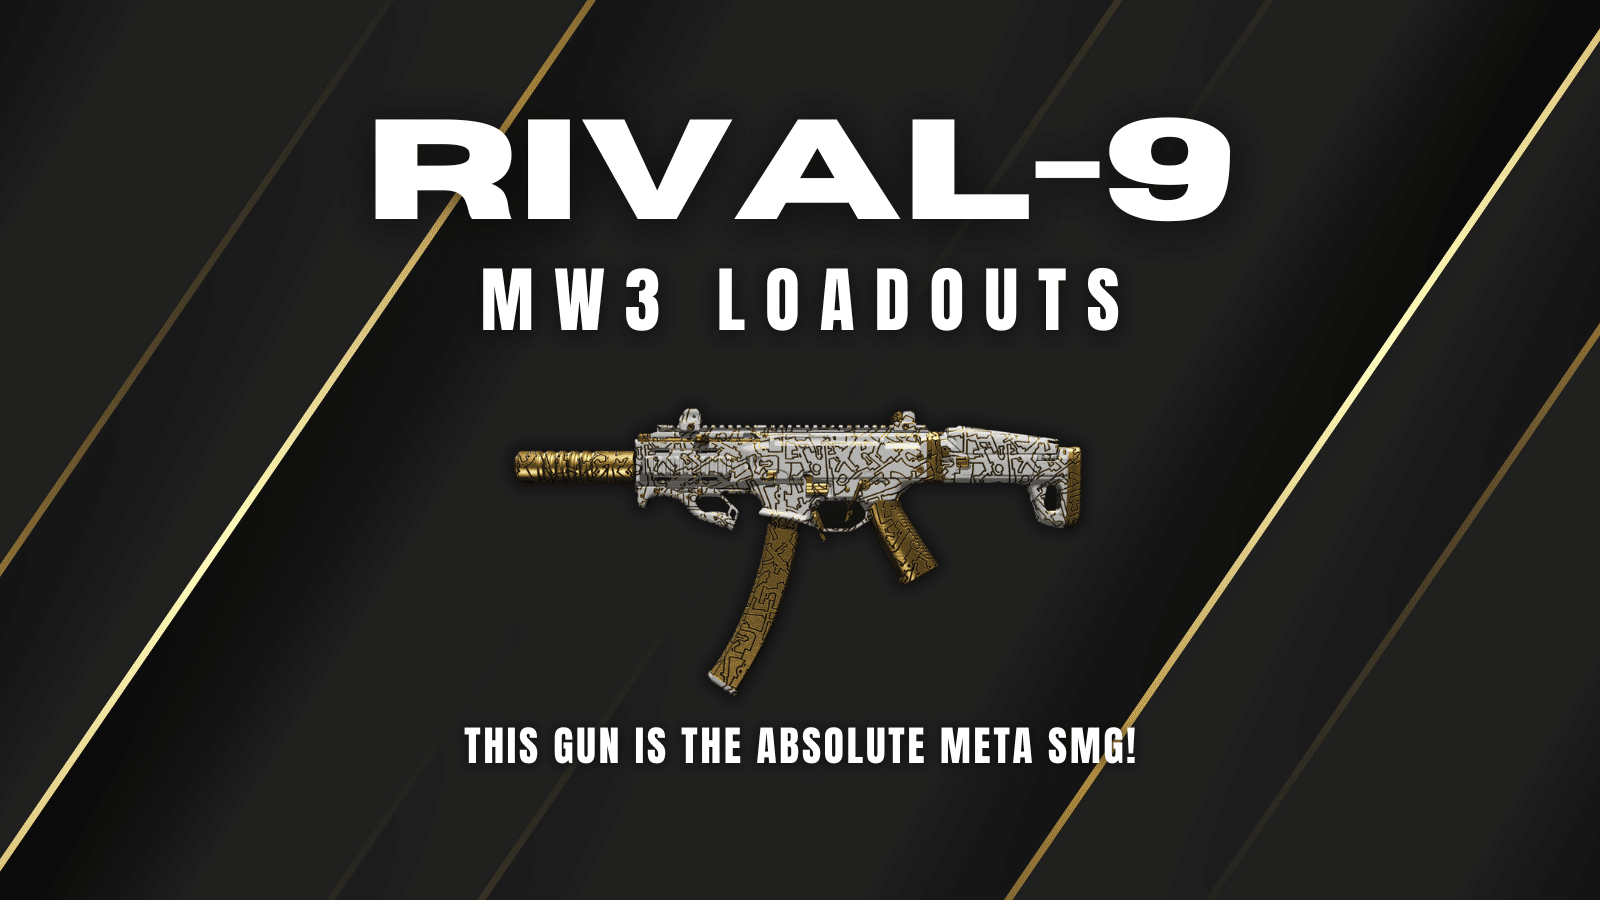 Best Rival-9 Loadouts for MW3